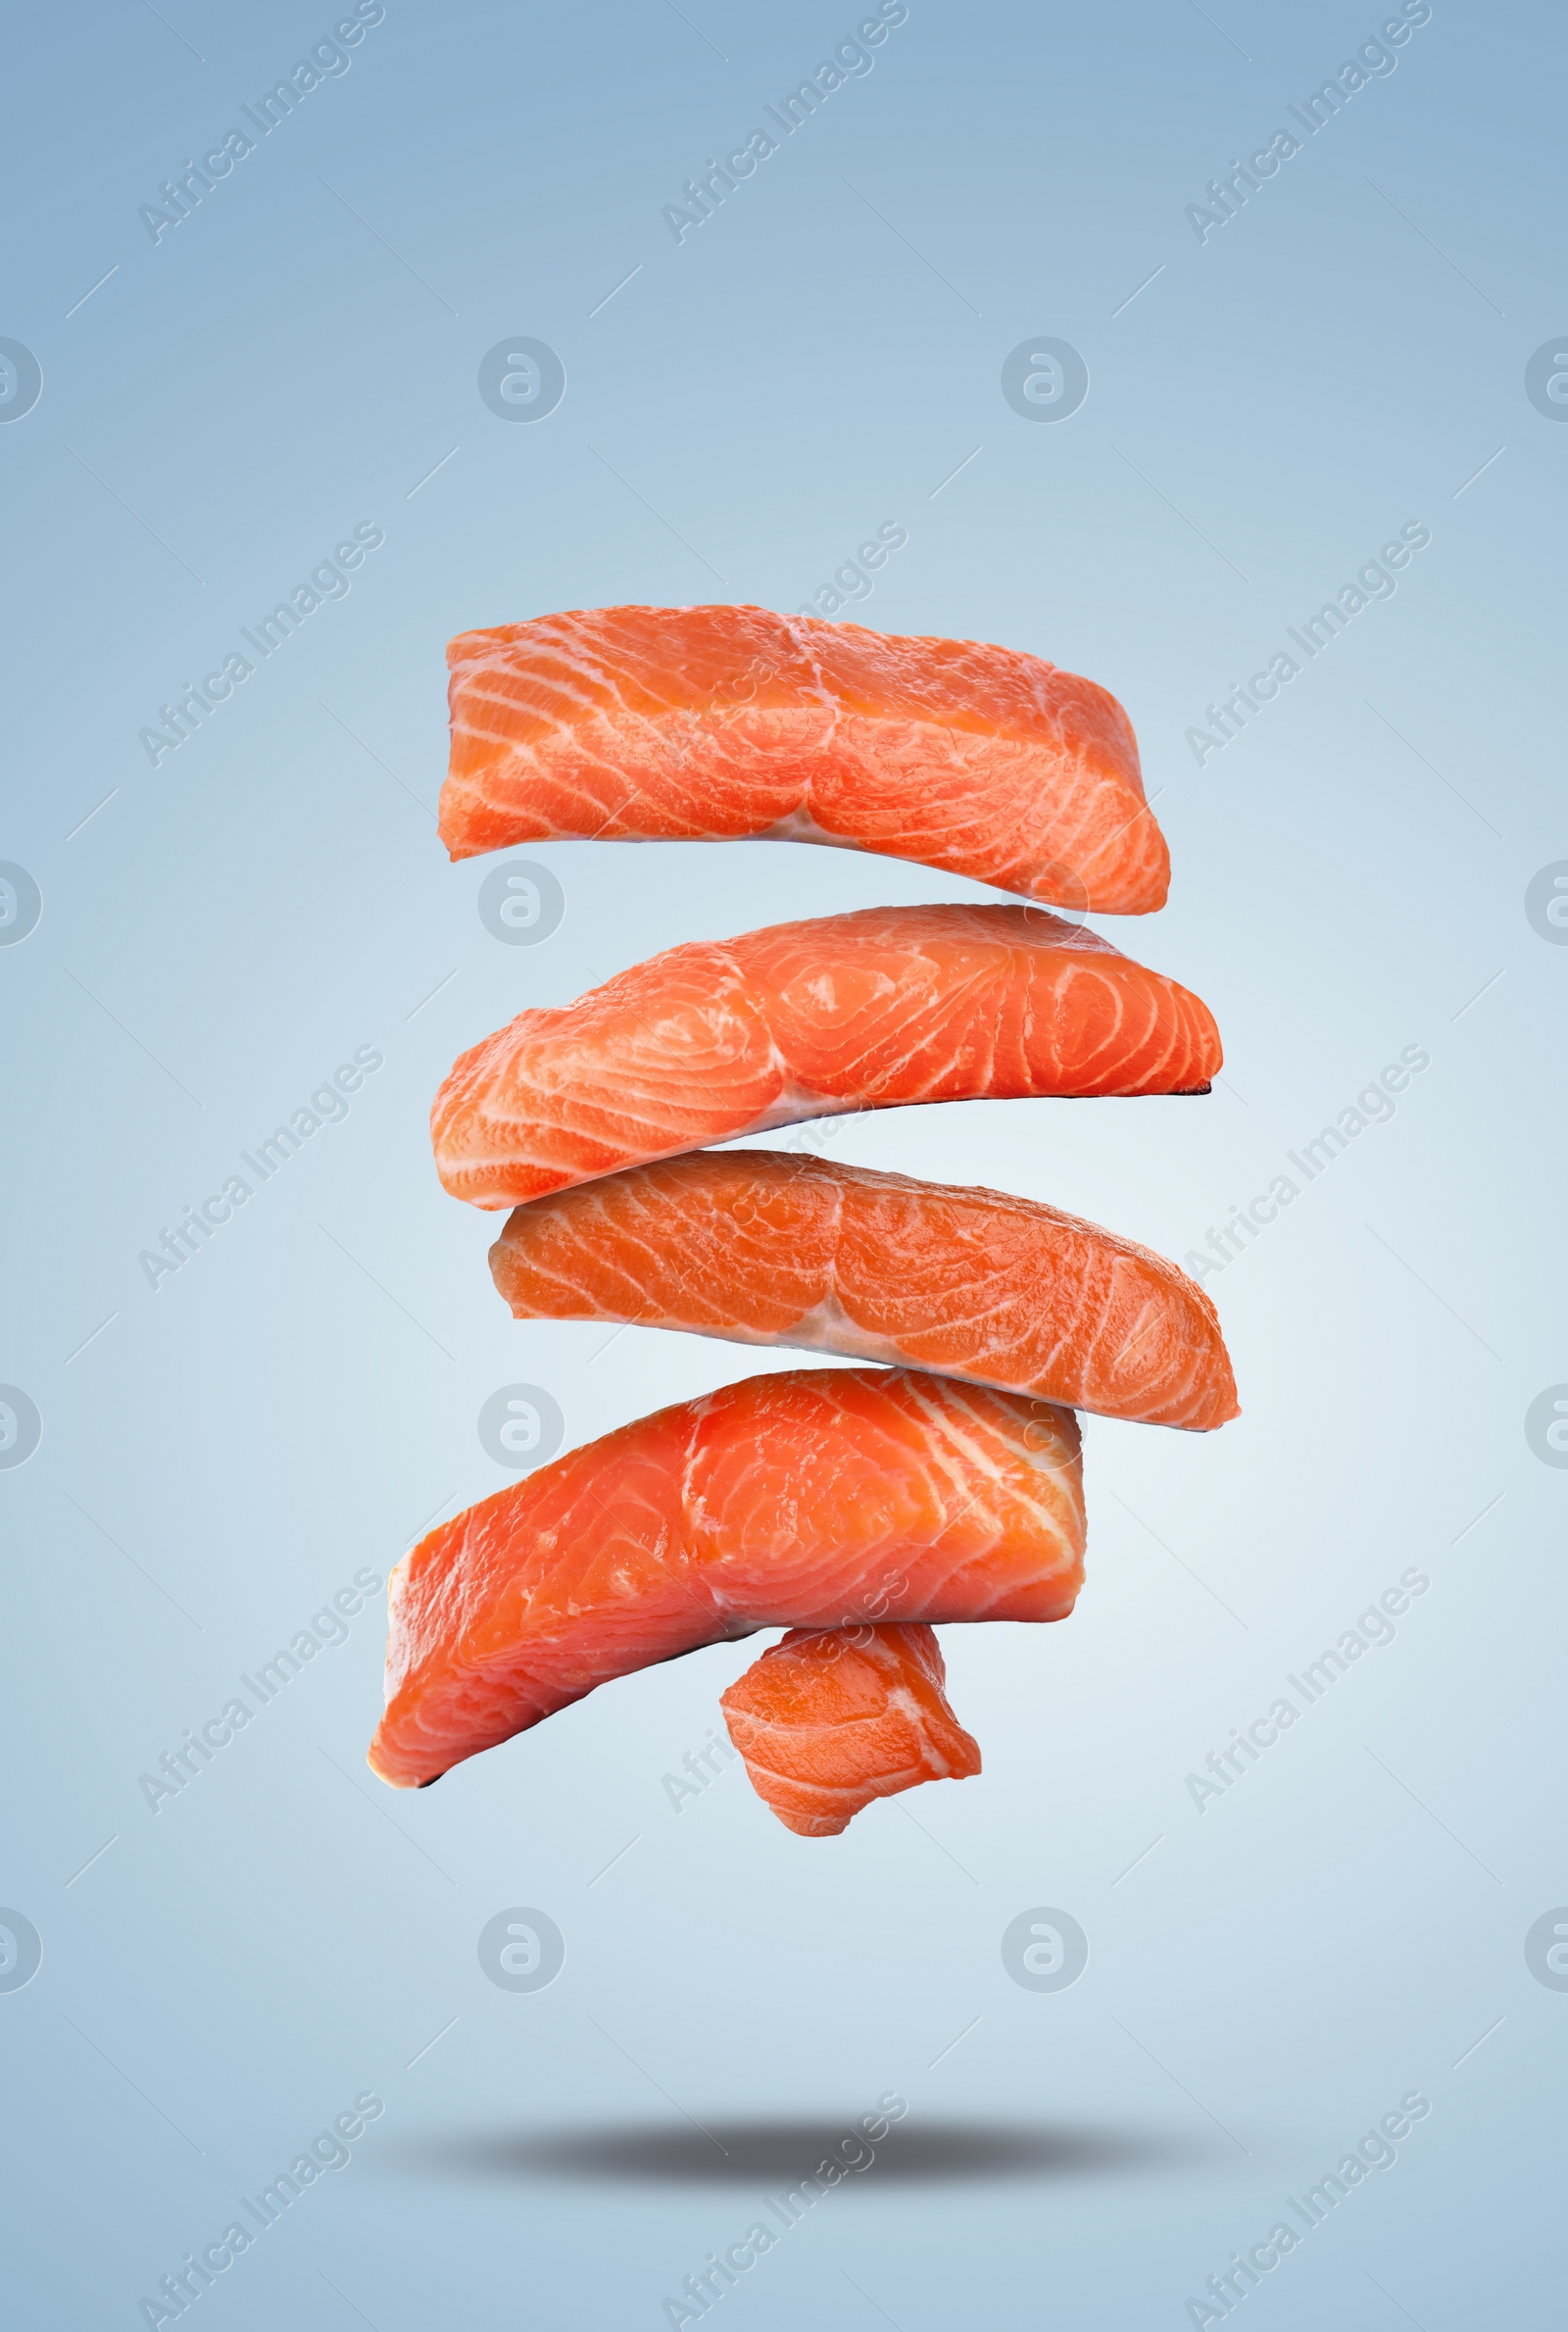 Image of Cut fresh salmon falling on pale light blue gradient background